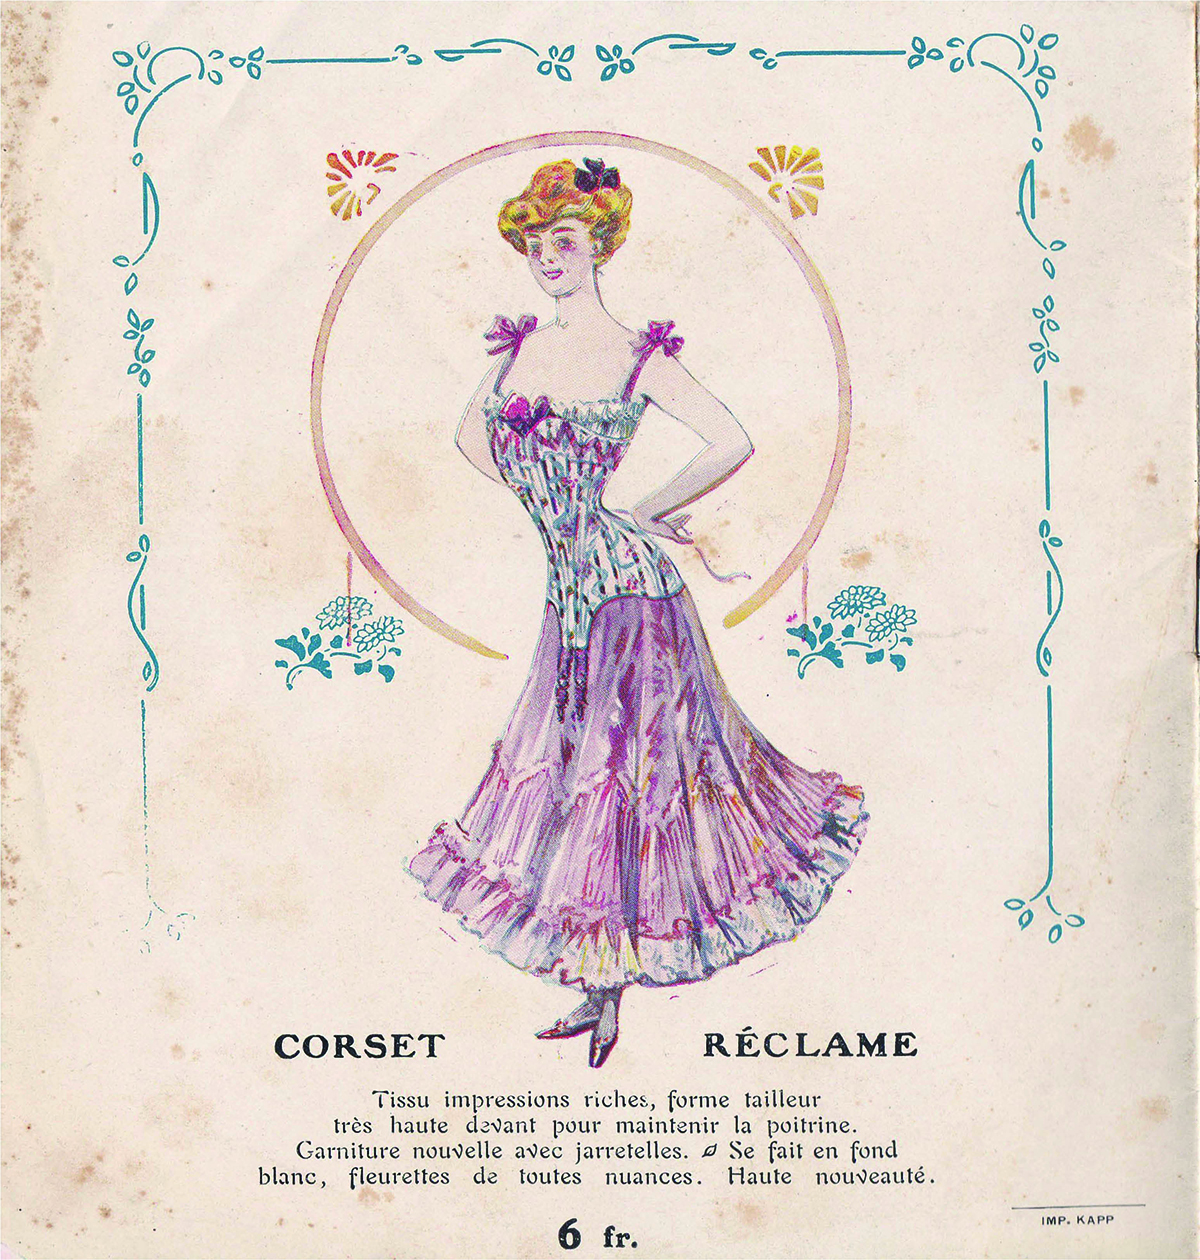 100.000 Corsets Catalogue, c. 1900s, France. The Underpinnings Museum